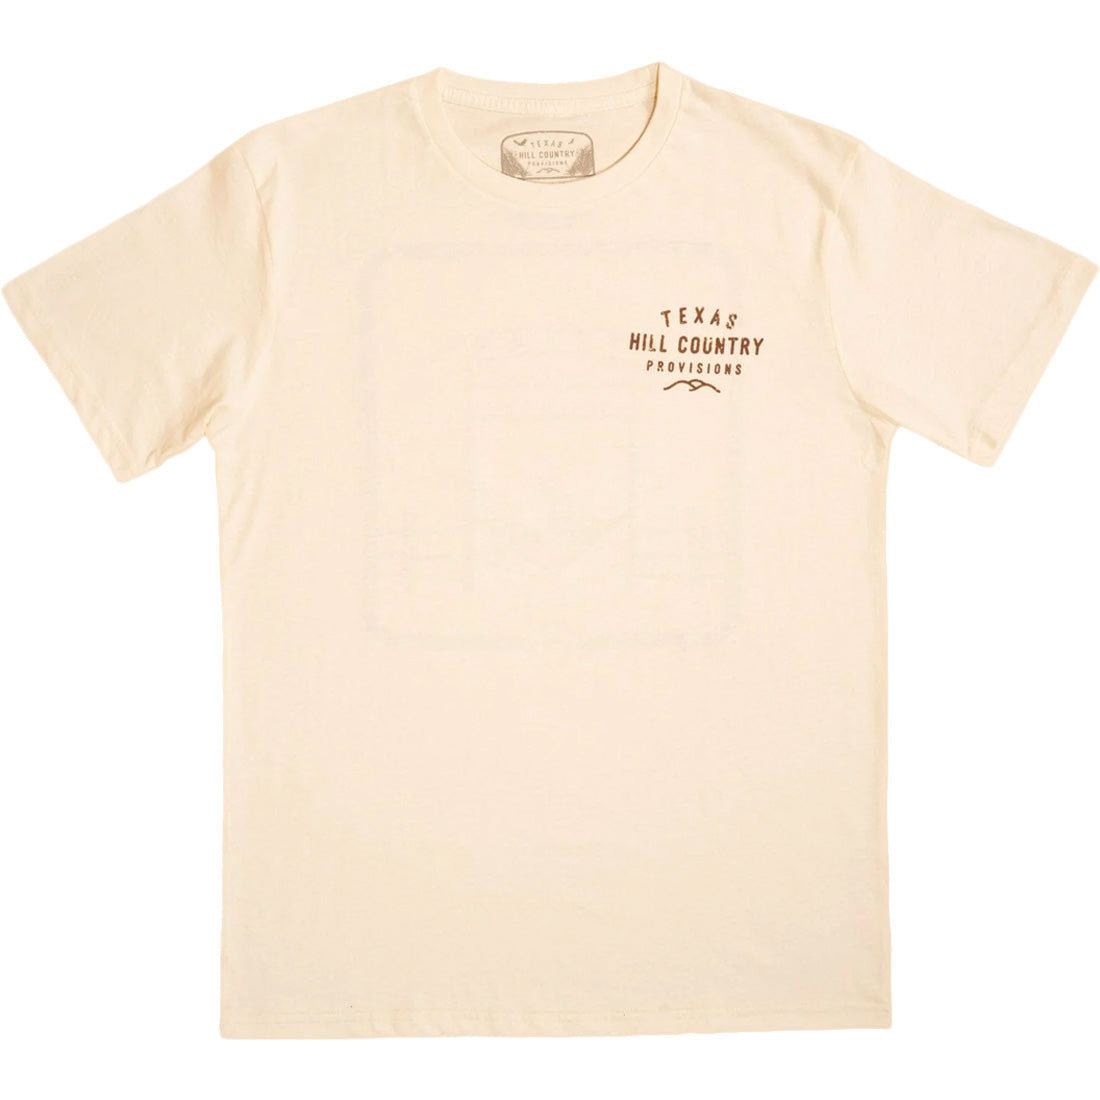 THC Provisions Chill Country Ranch Tee - Men's